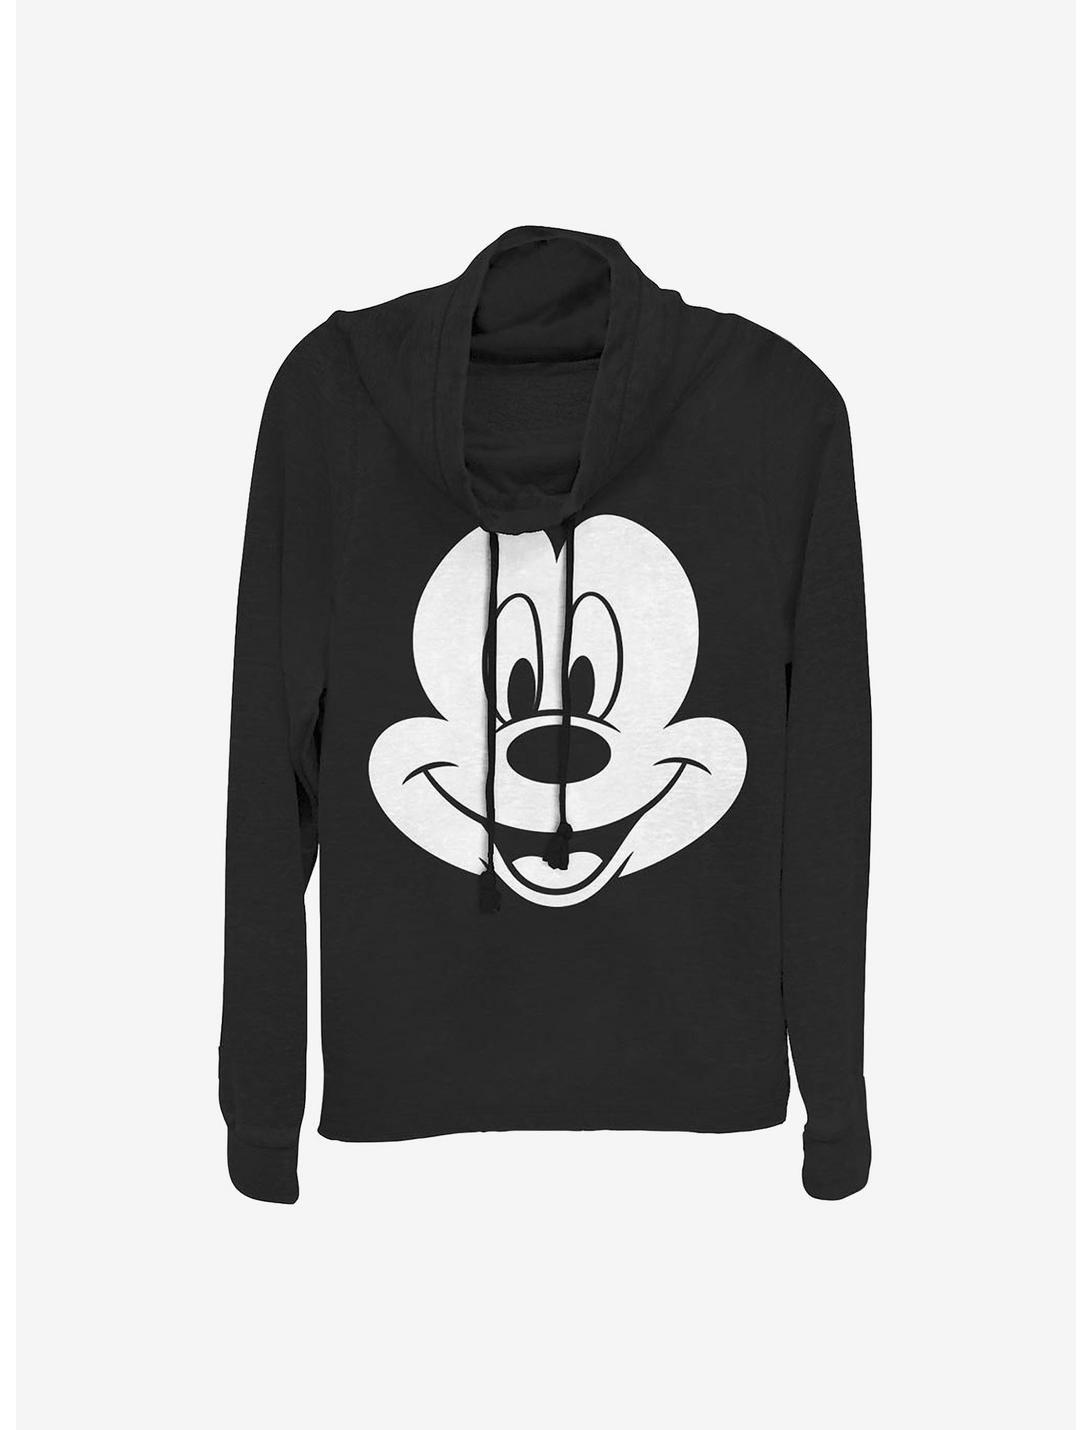 Disney Mickey Mouse Big Face Mickey Cowlneck Long-Sleeve Girls Top, BLACK, hi-res